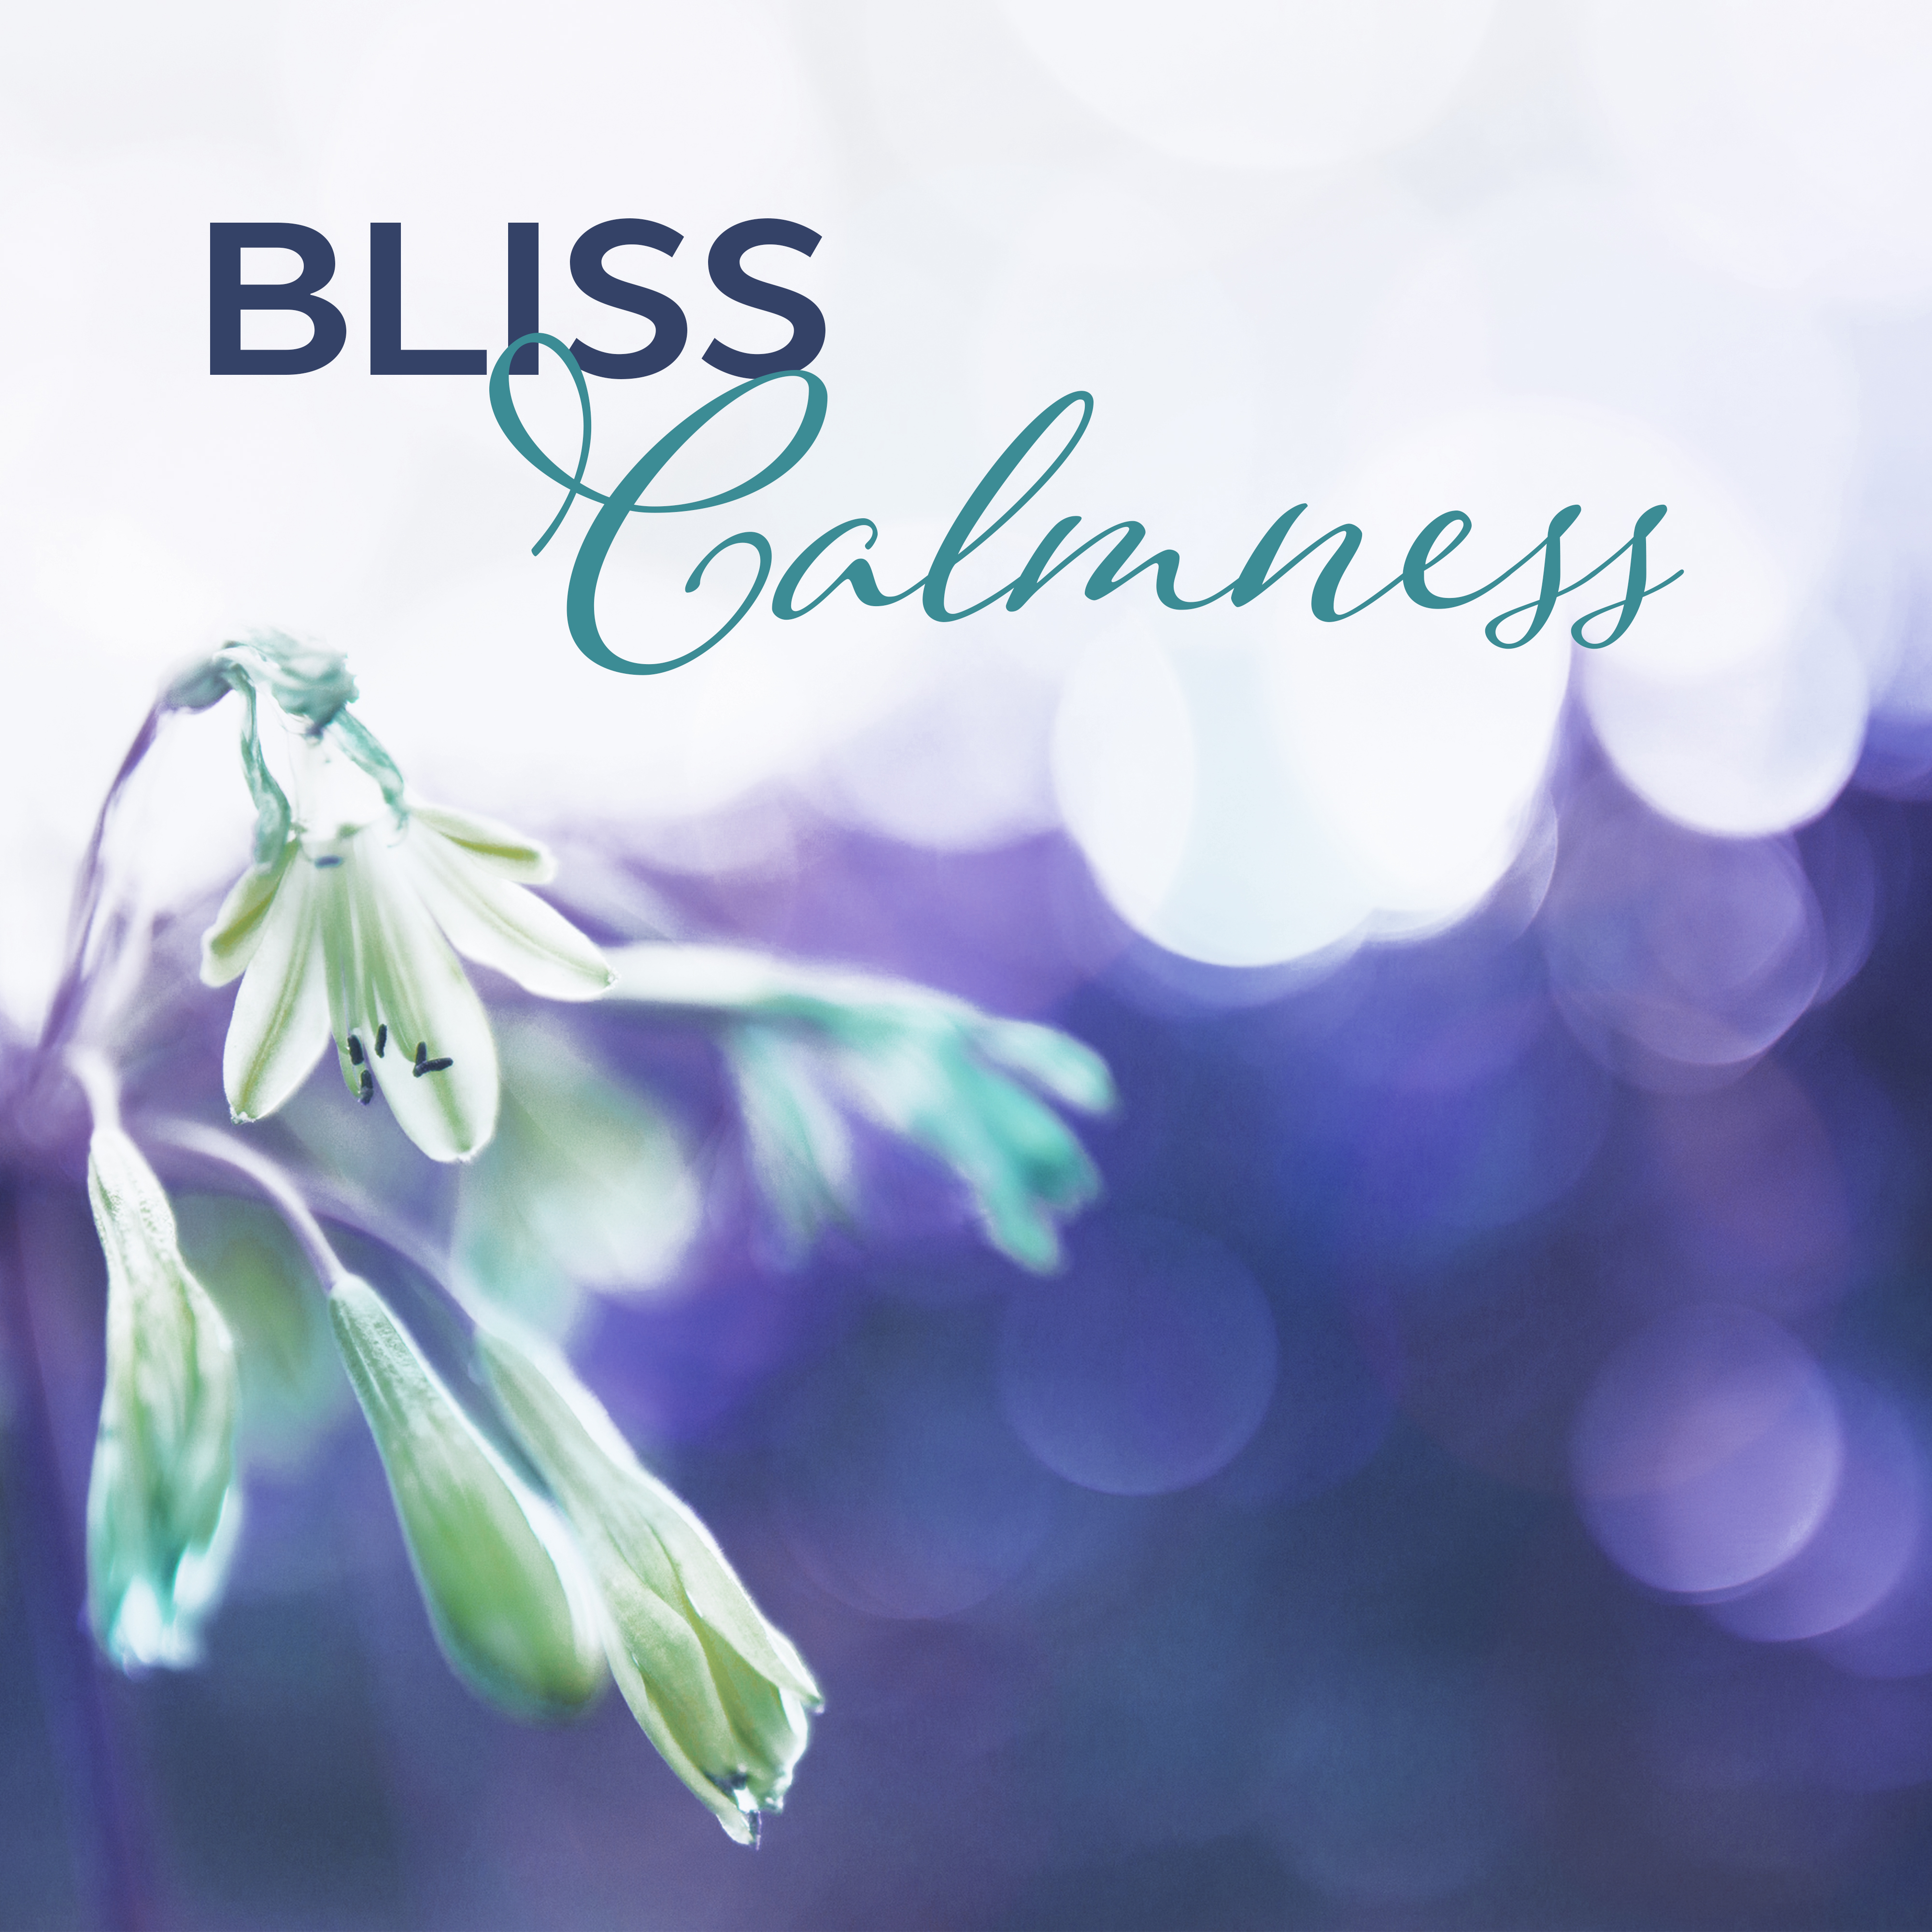 Bliss Calmness – Anti-Stress Music Therapy, Relaxation, Rest, Zen, Harmony Life, Nature Sounds